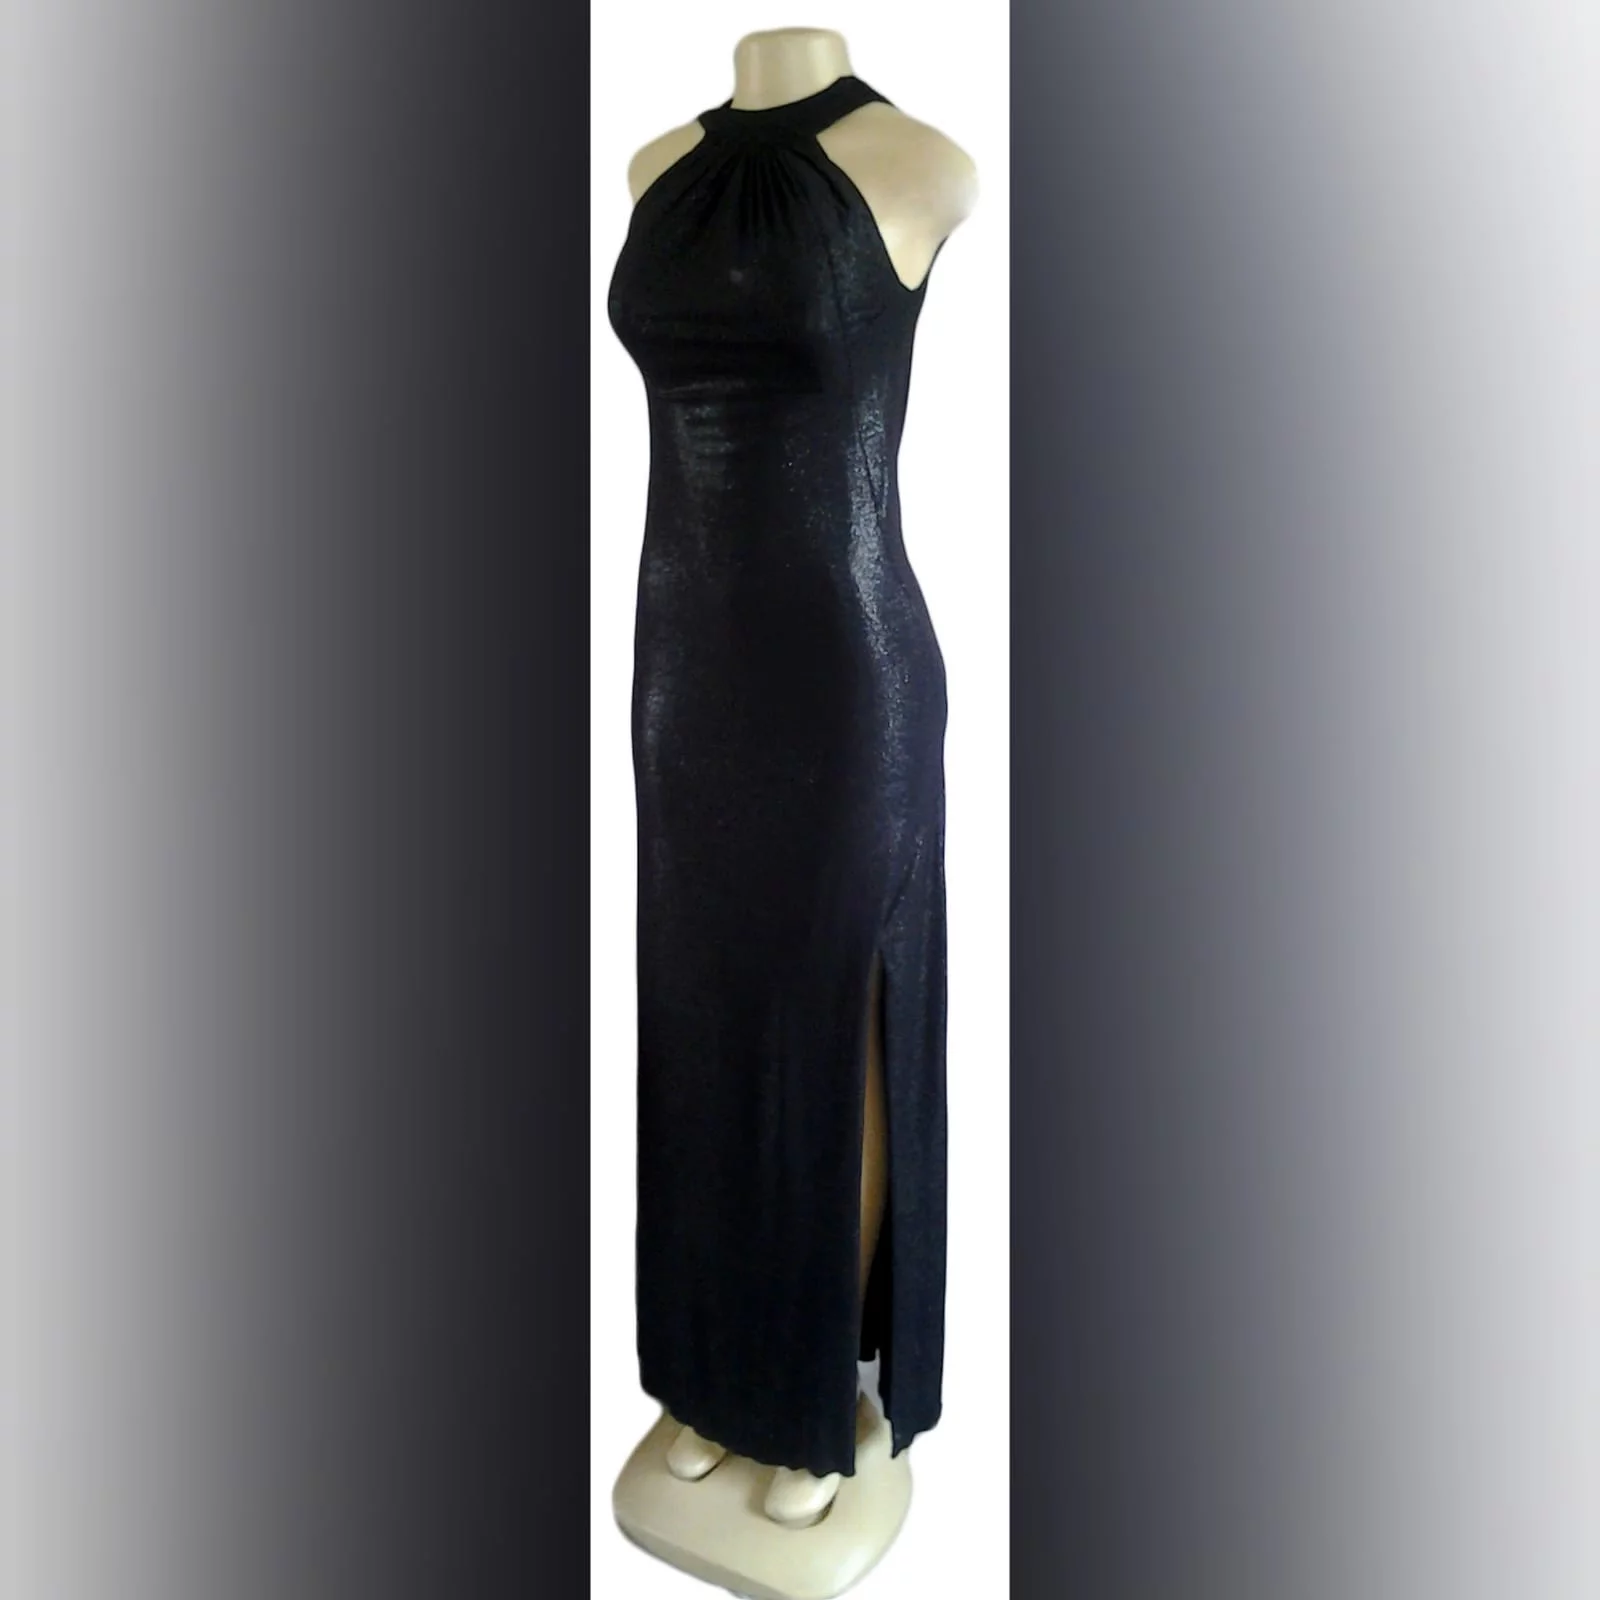 Black shimmer fitted long evening dress 2 black shimmer fitted long evening dress, with a gathered neckline and a low open cowl neck at the back, with a side slit.